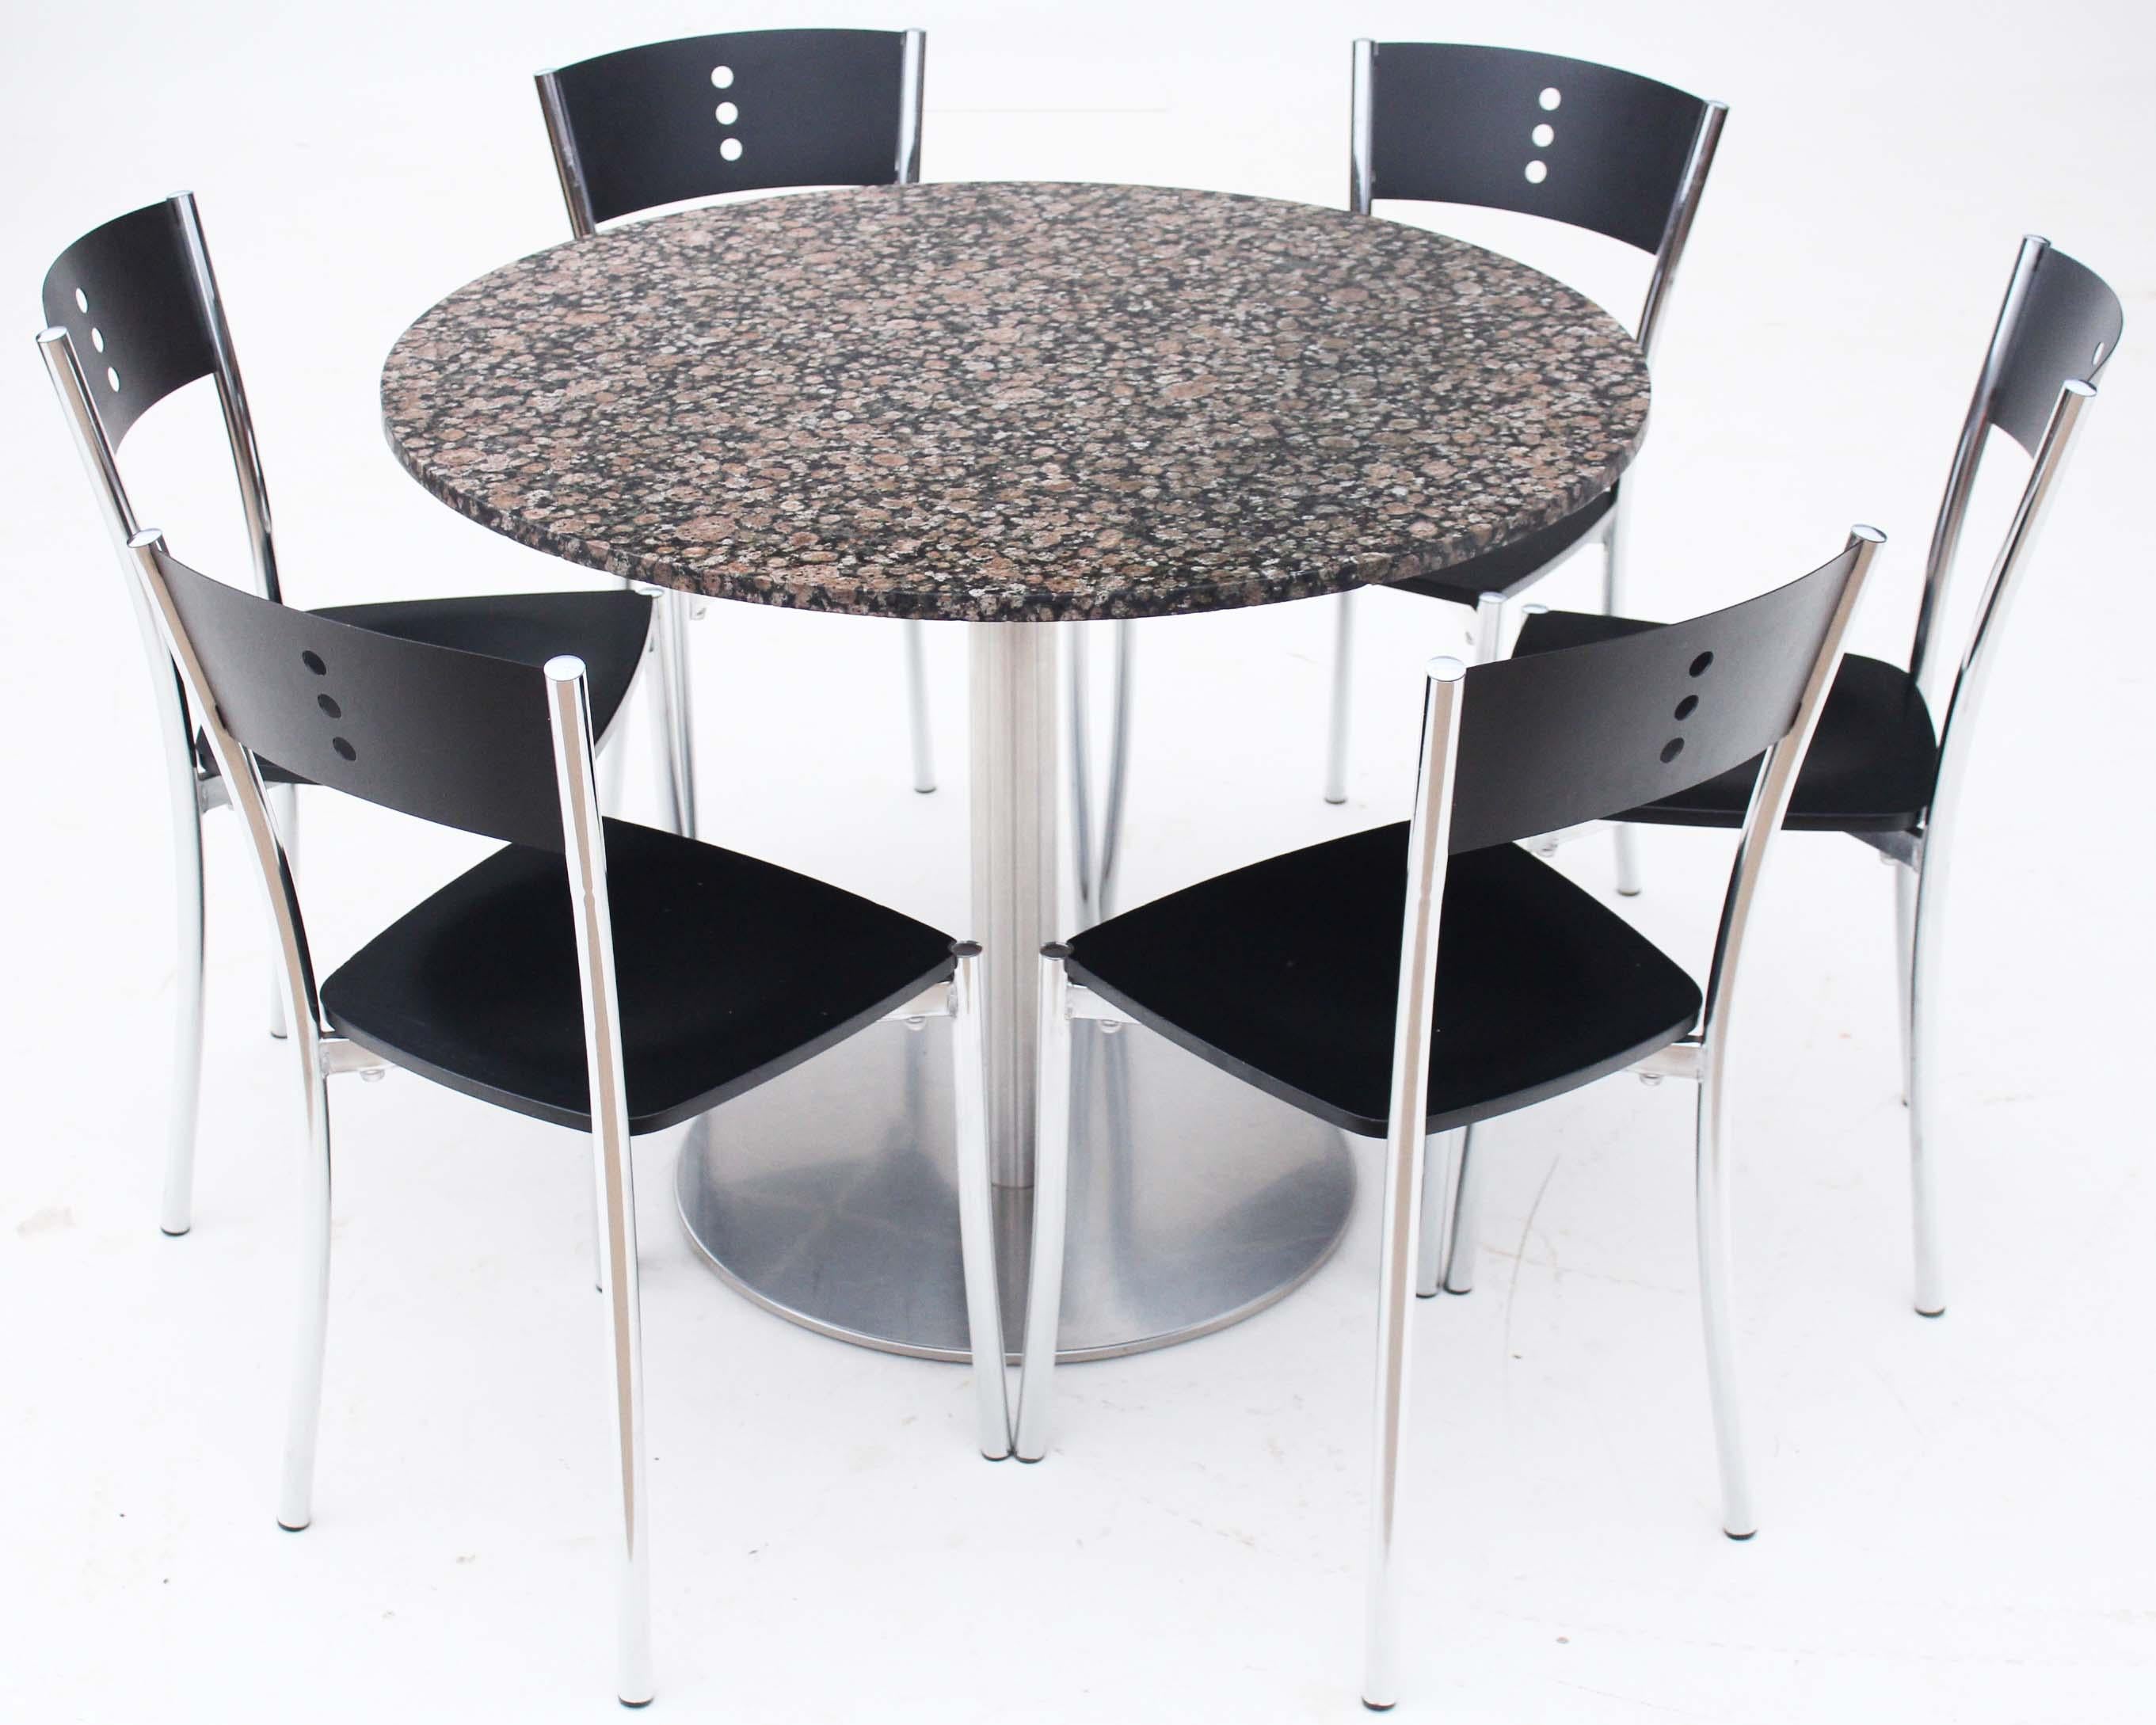 Retro vintage granite table and 6 chrome black dining bistro kitchen chairs.

Late 20th Century.

Breathtaking baltic brown granite table top.

Lovely proportions and styling.

Would look great in the right location, is attractive and aesthetically